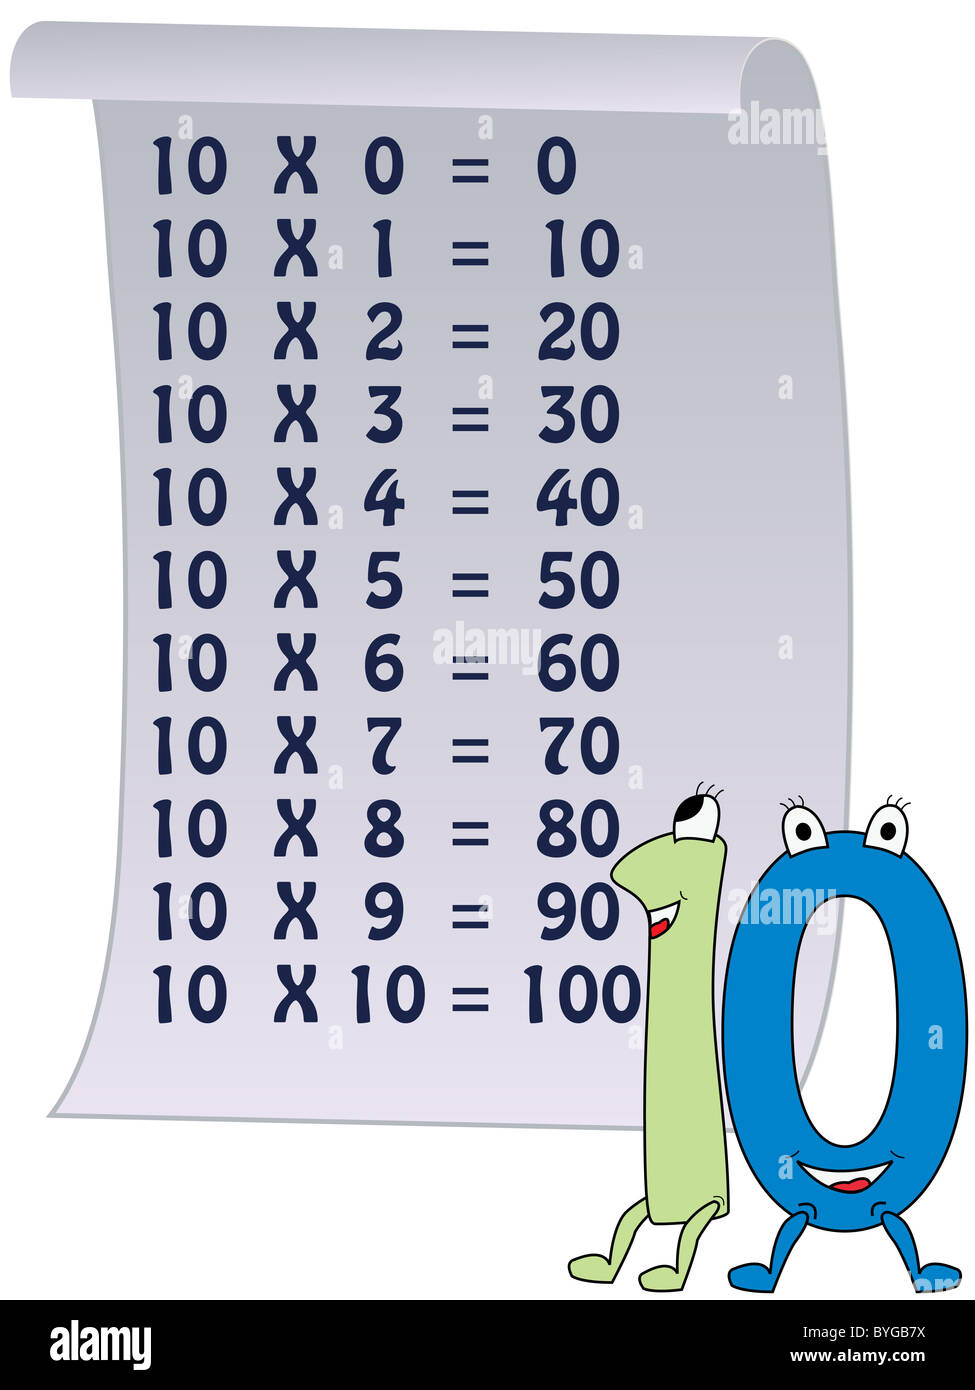 Numbers Series From 0 To 10 With The Multiplication Tables Stock